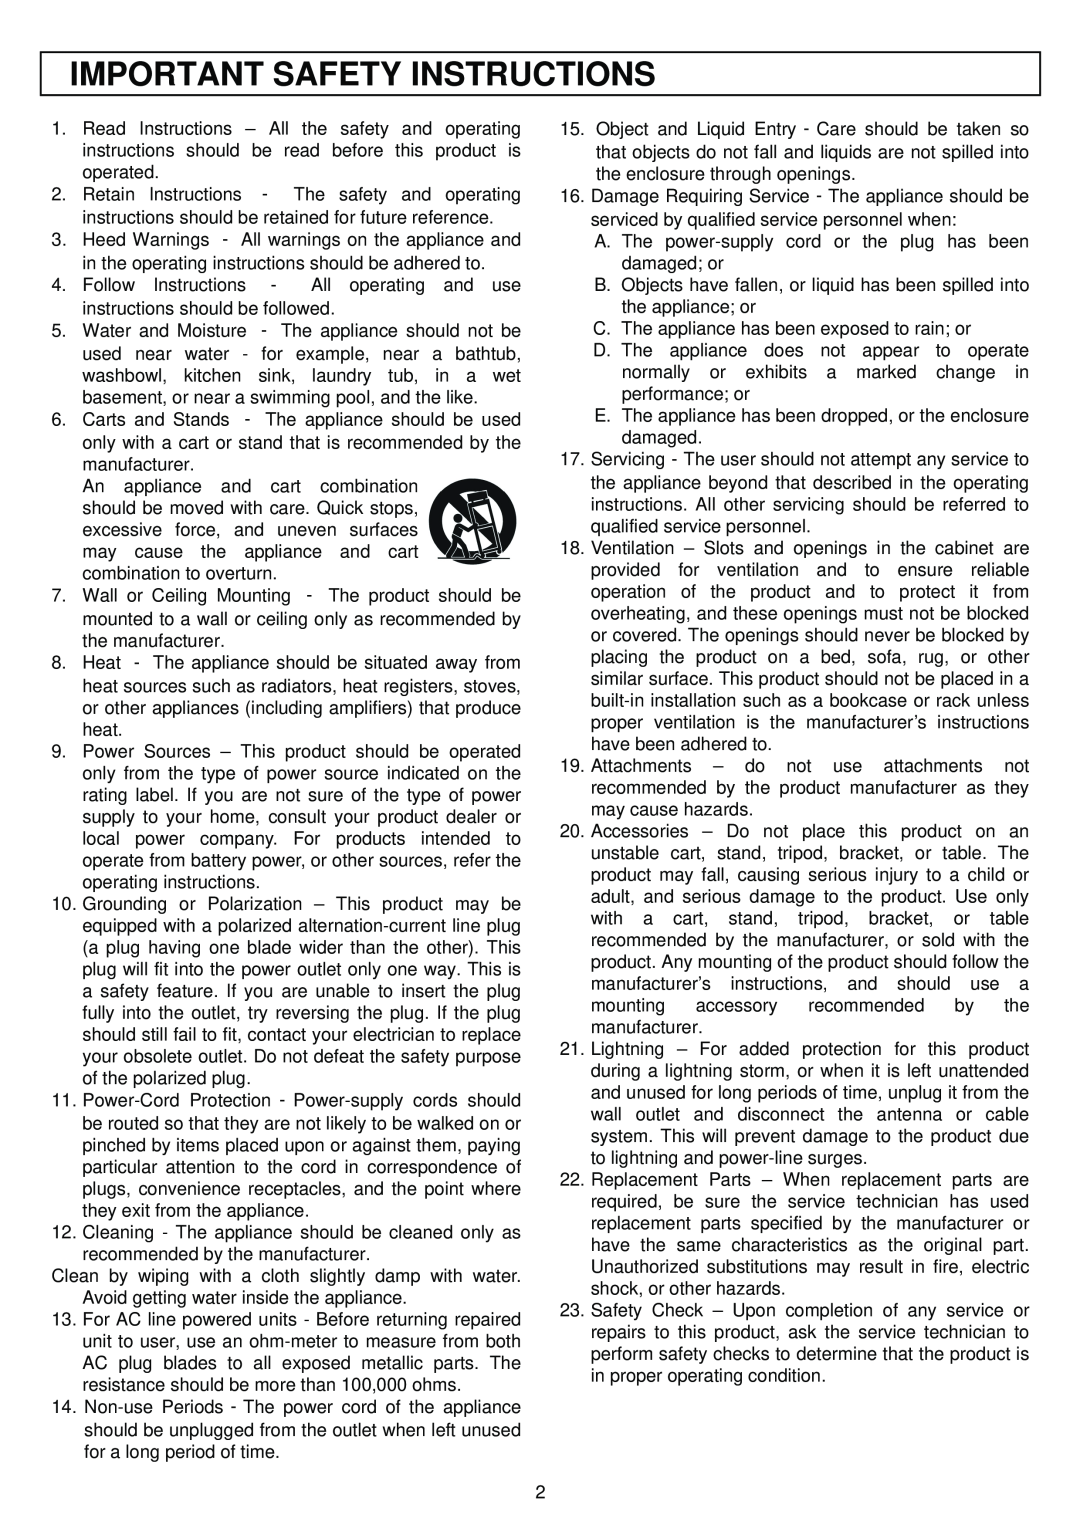 Stanton S-650 MK II manual Important Safety Instructions 